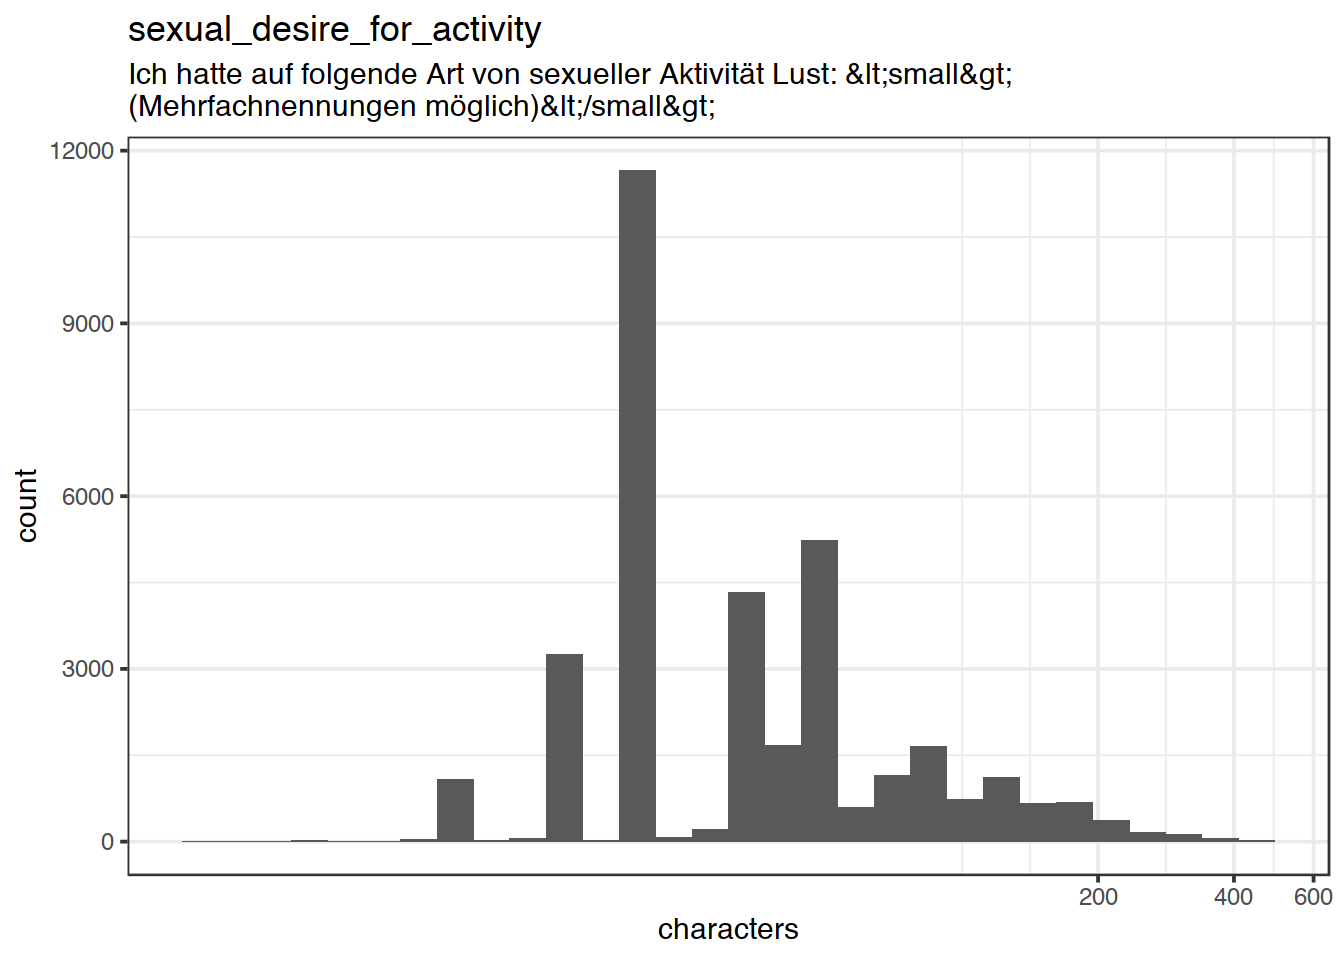 Distribution of values for sexual_desire_for_activity